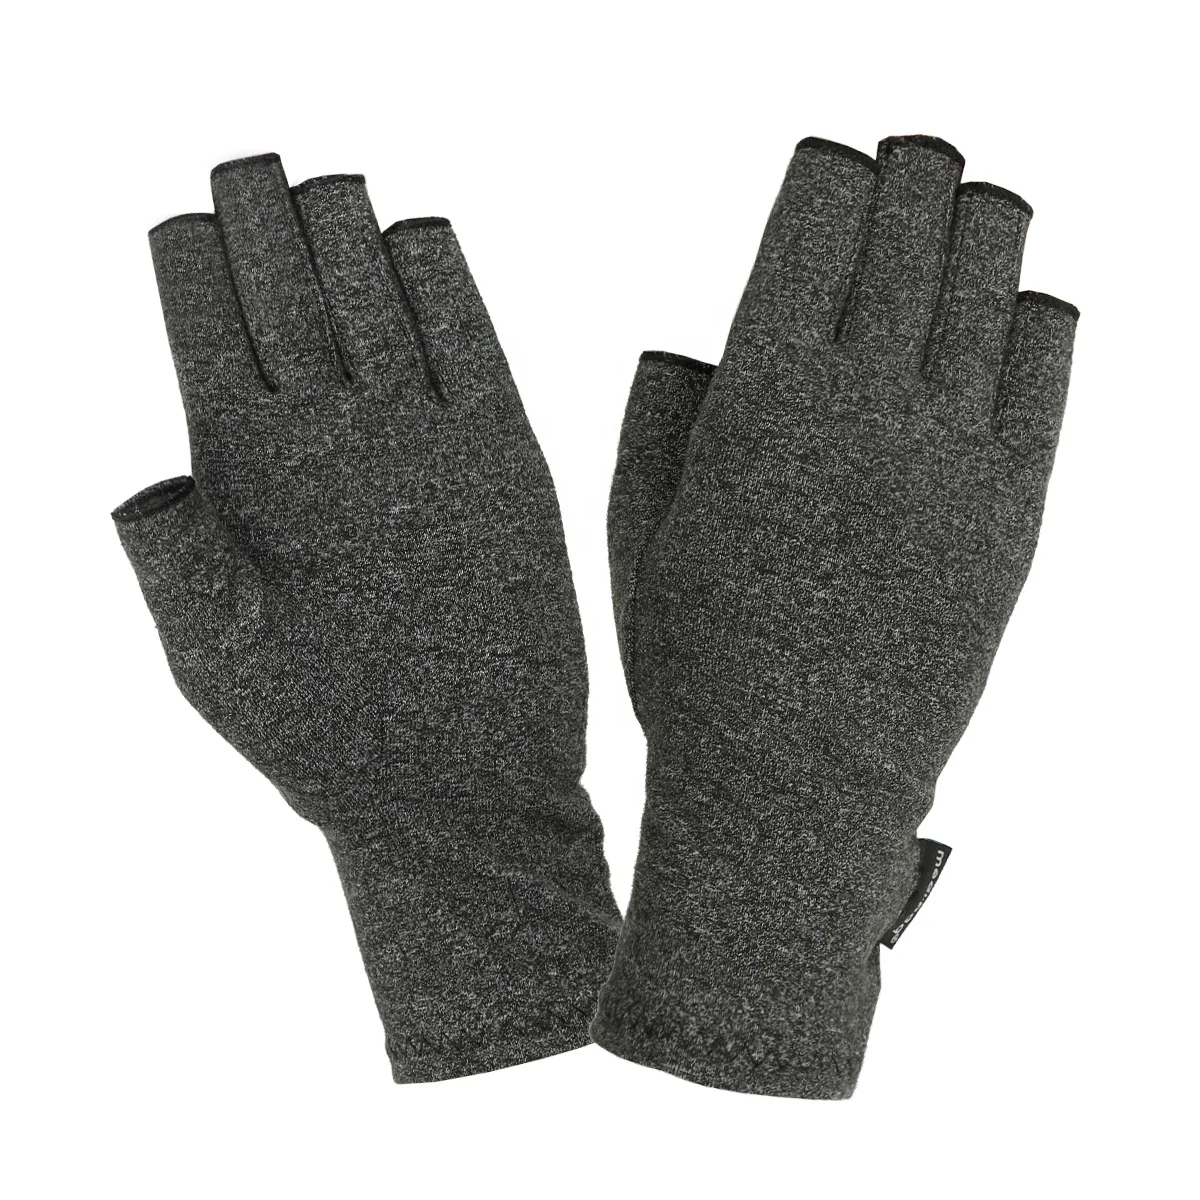 Anti-Arthritis Gloves (Pair) – Providing Warmth and Compression to Help Increase Circulation Reducing Pain and Promoting Healing